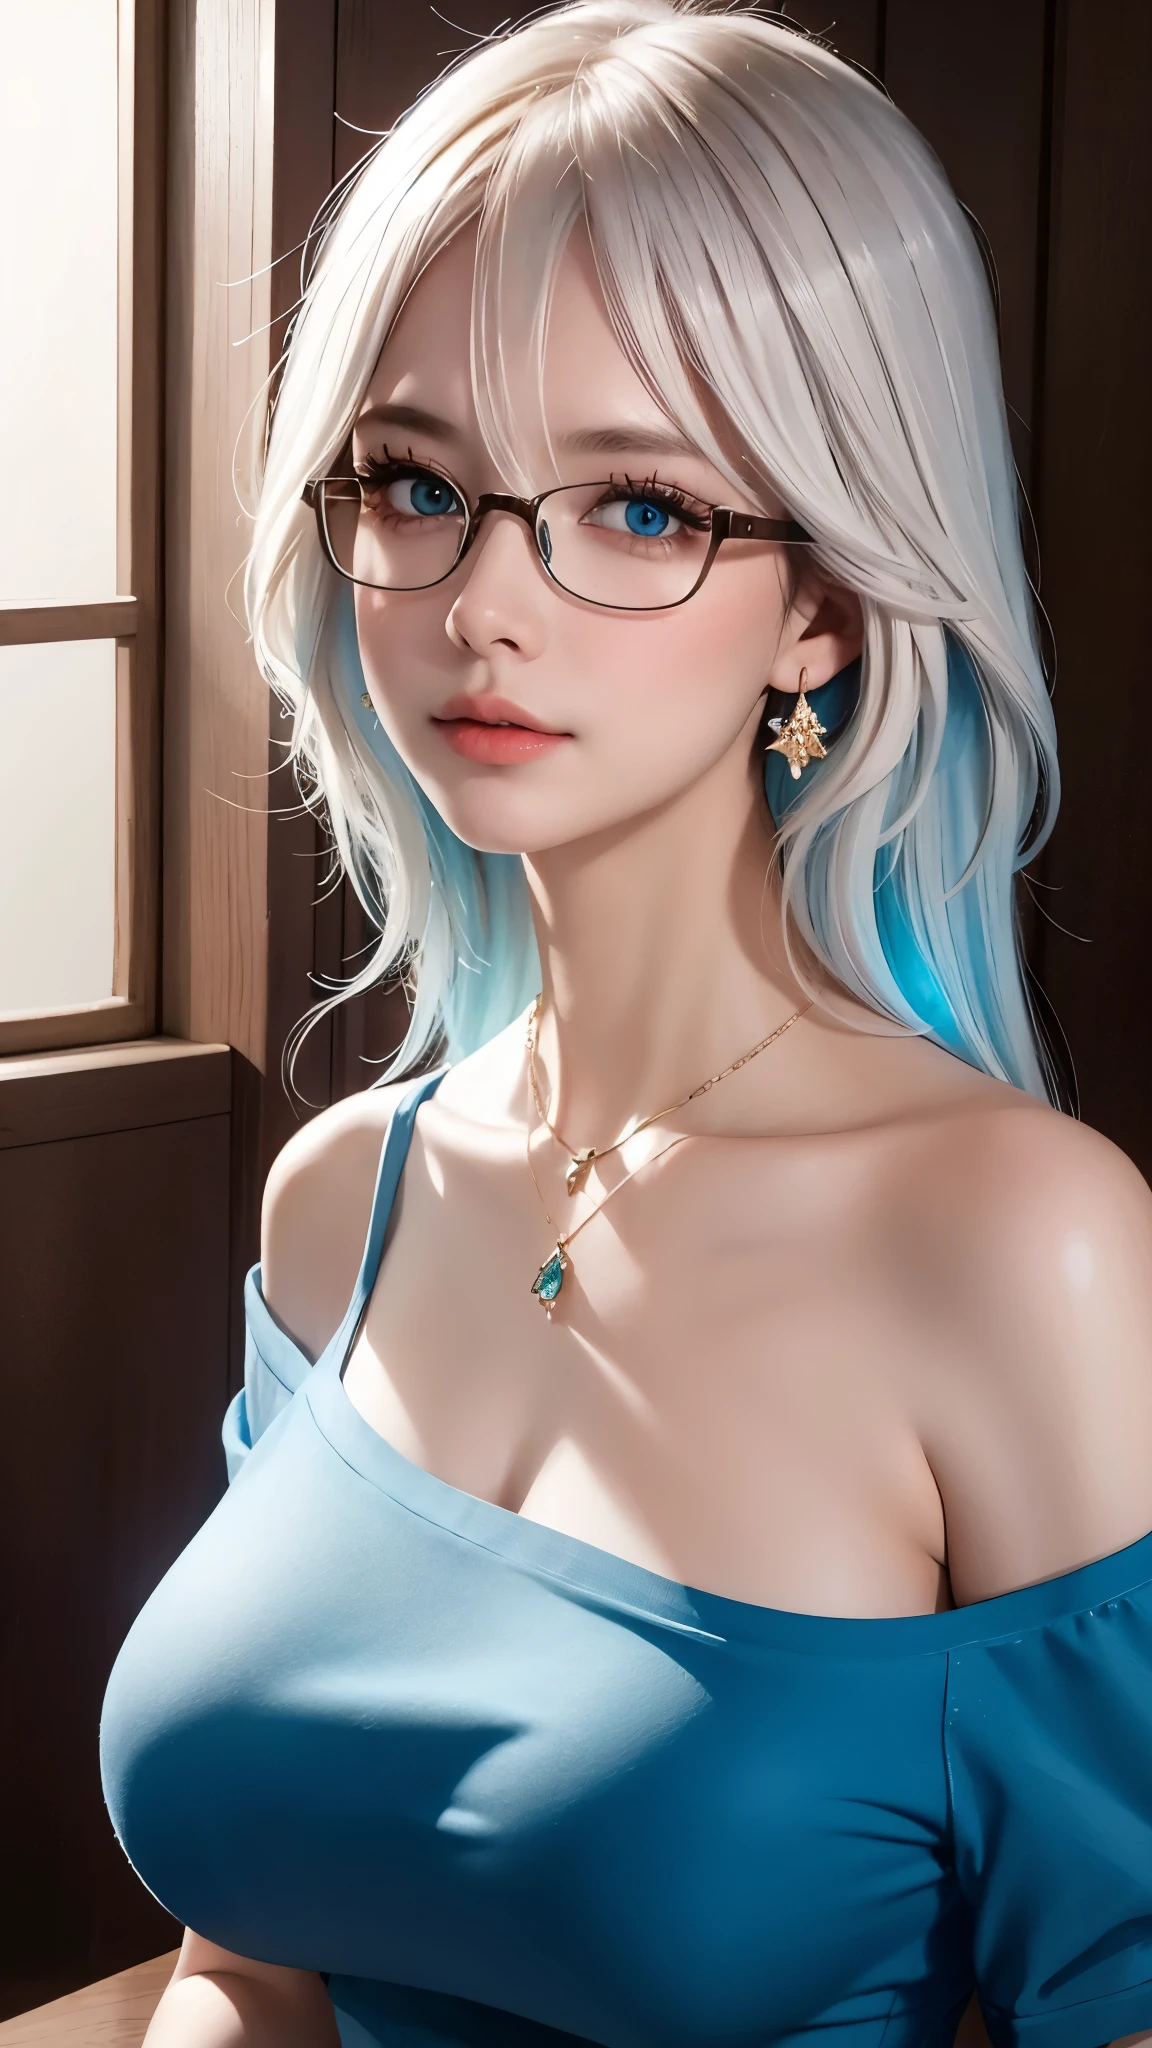 masterpiece, best quality, illustration, saxophone blue hair, platinum earrings, platinum necklace, off shoulder shirt，1 girl, charming, (dynamic lighting:1.2), Cinema lighting, Exquisite facial features, delicate blue eyes, Wear half-rimmed glasses（focus），sharp pupils, realistic student, depth of field, bokeh, Sharp focus, (super detailed, bloom, glow:1.4), (huge breasts), (saggy breasts), looking into camera